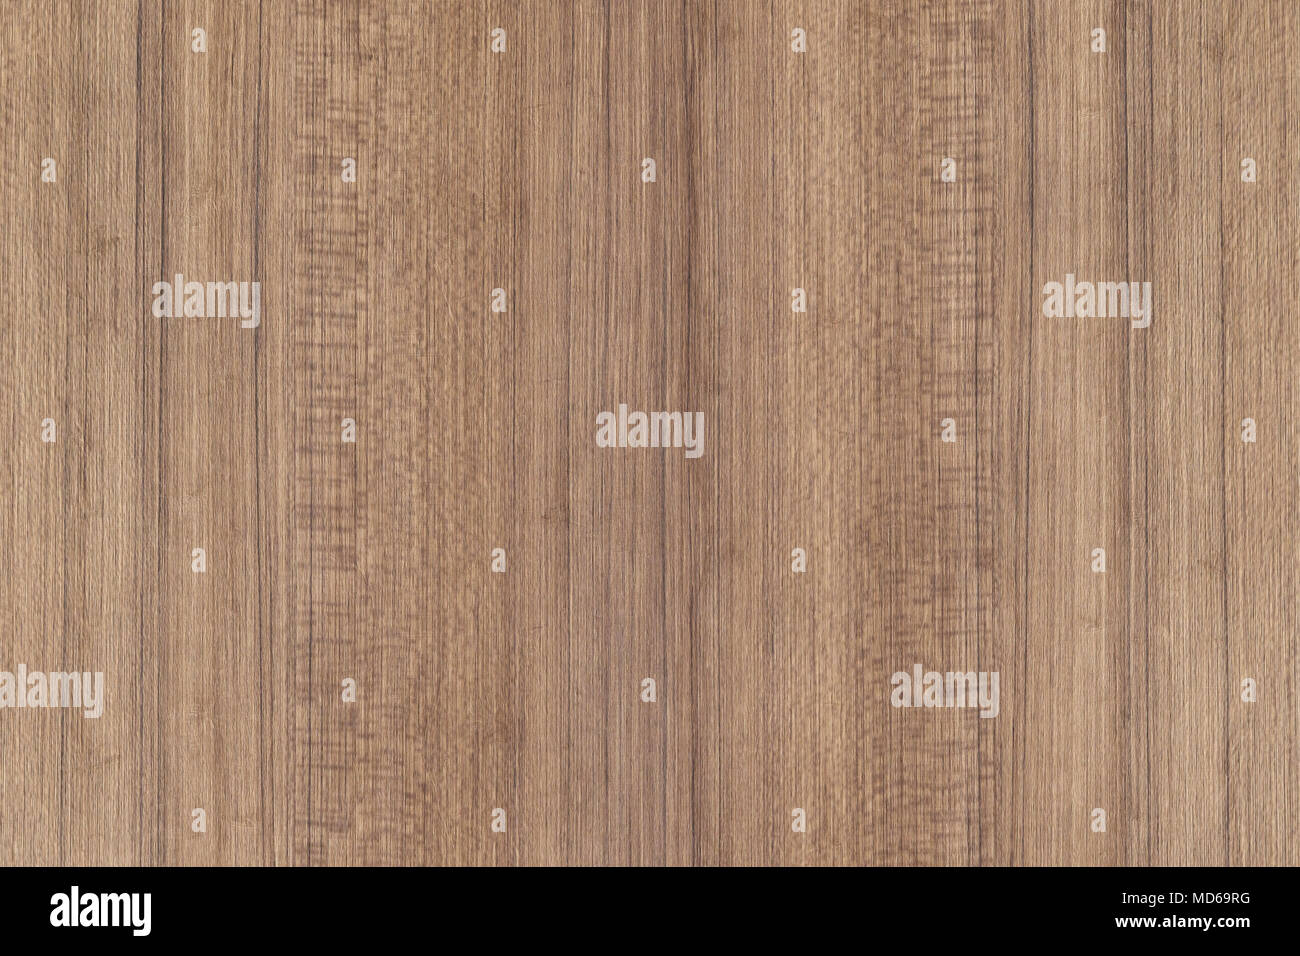 brown grunge wooden texture to use as background, wood texture with natural light pattern Stock Photo